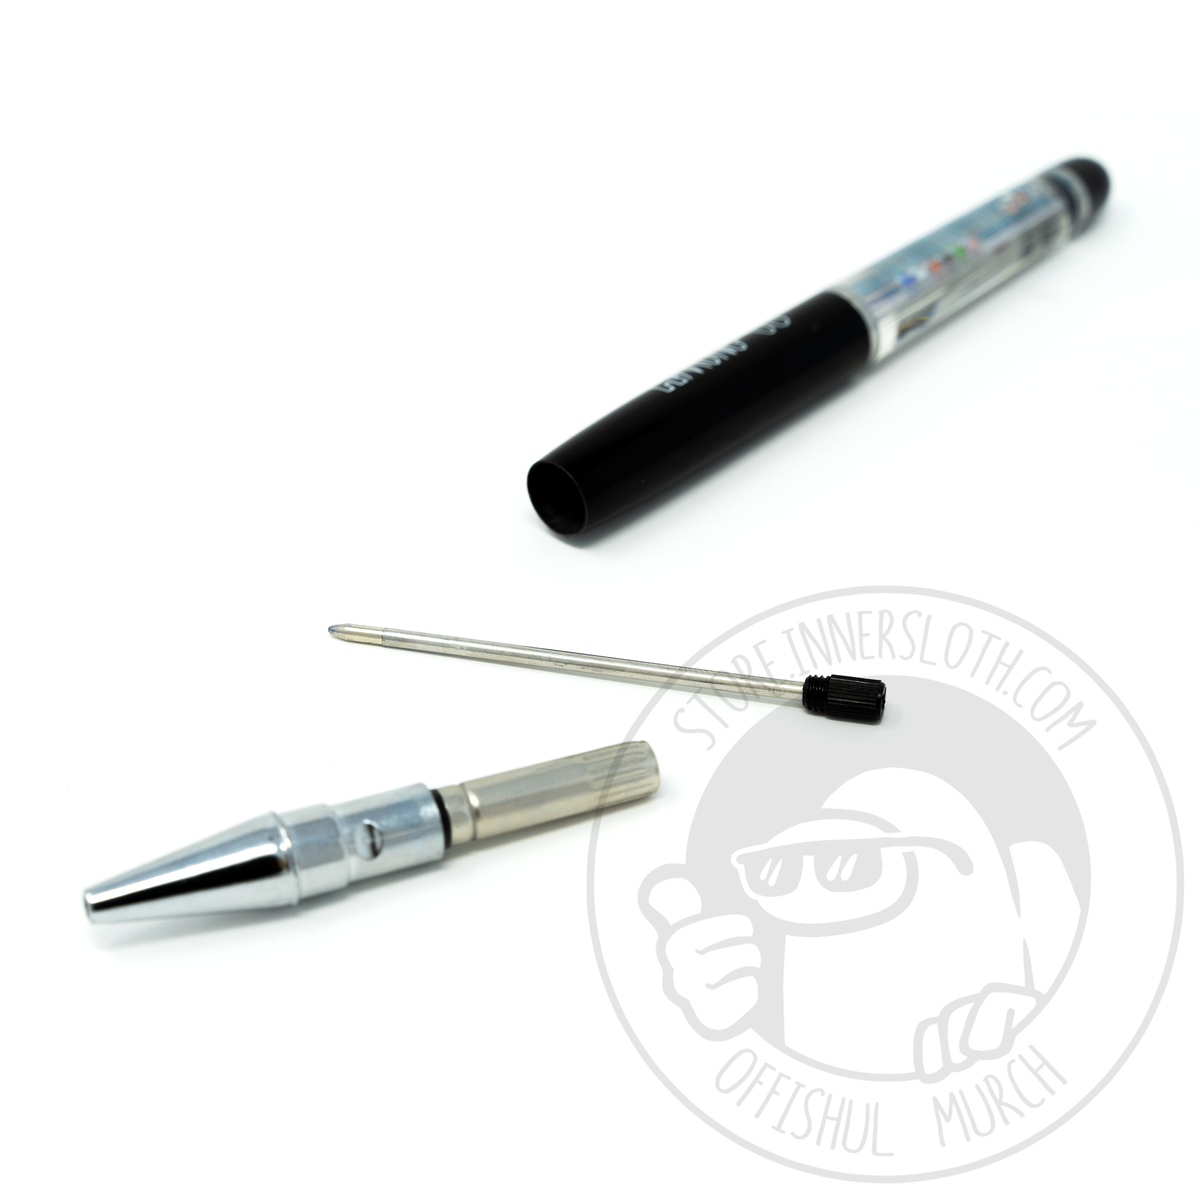 A disassembled view of the pen. The Pen is broken up into three pieces. The tip and ink barrel, the metal nib, and the plastic tubing.